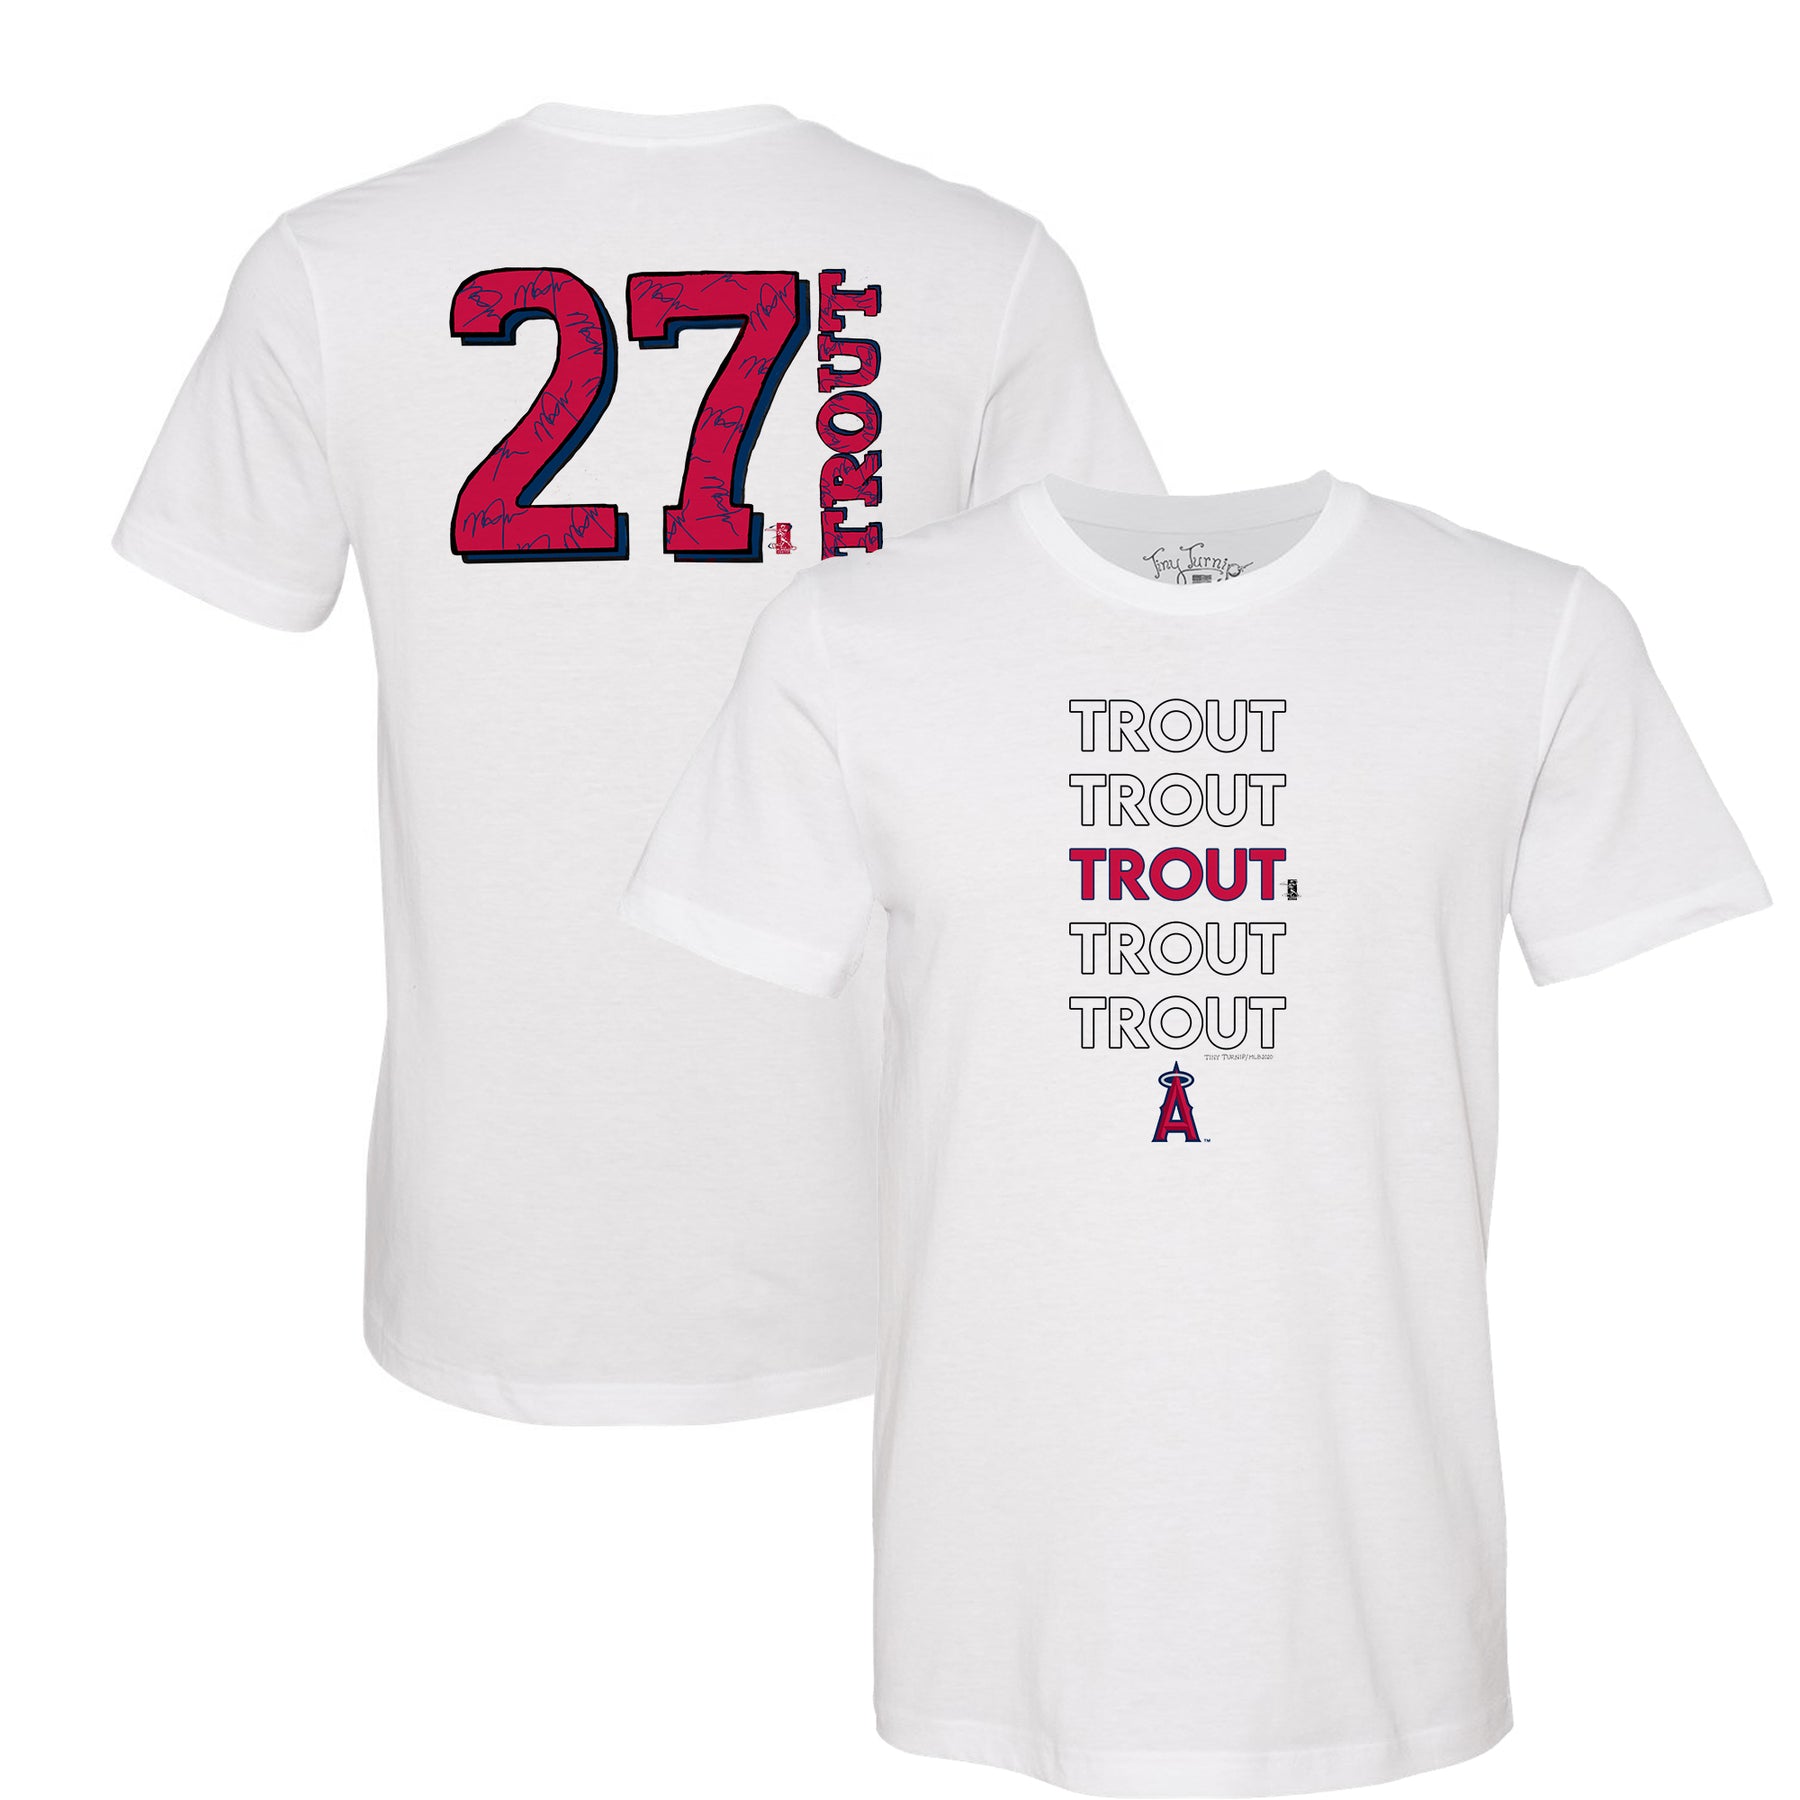 mike trout jersey youth large